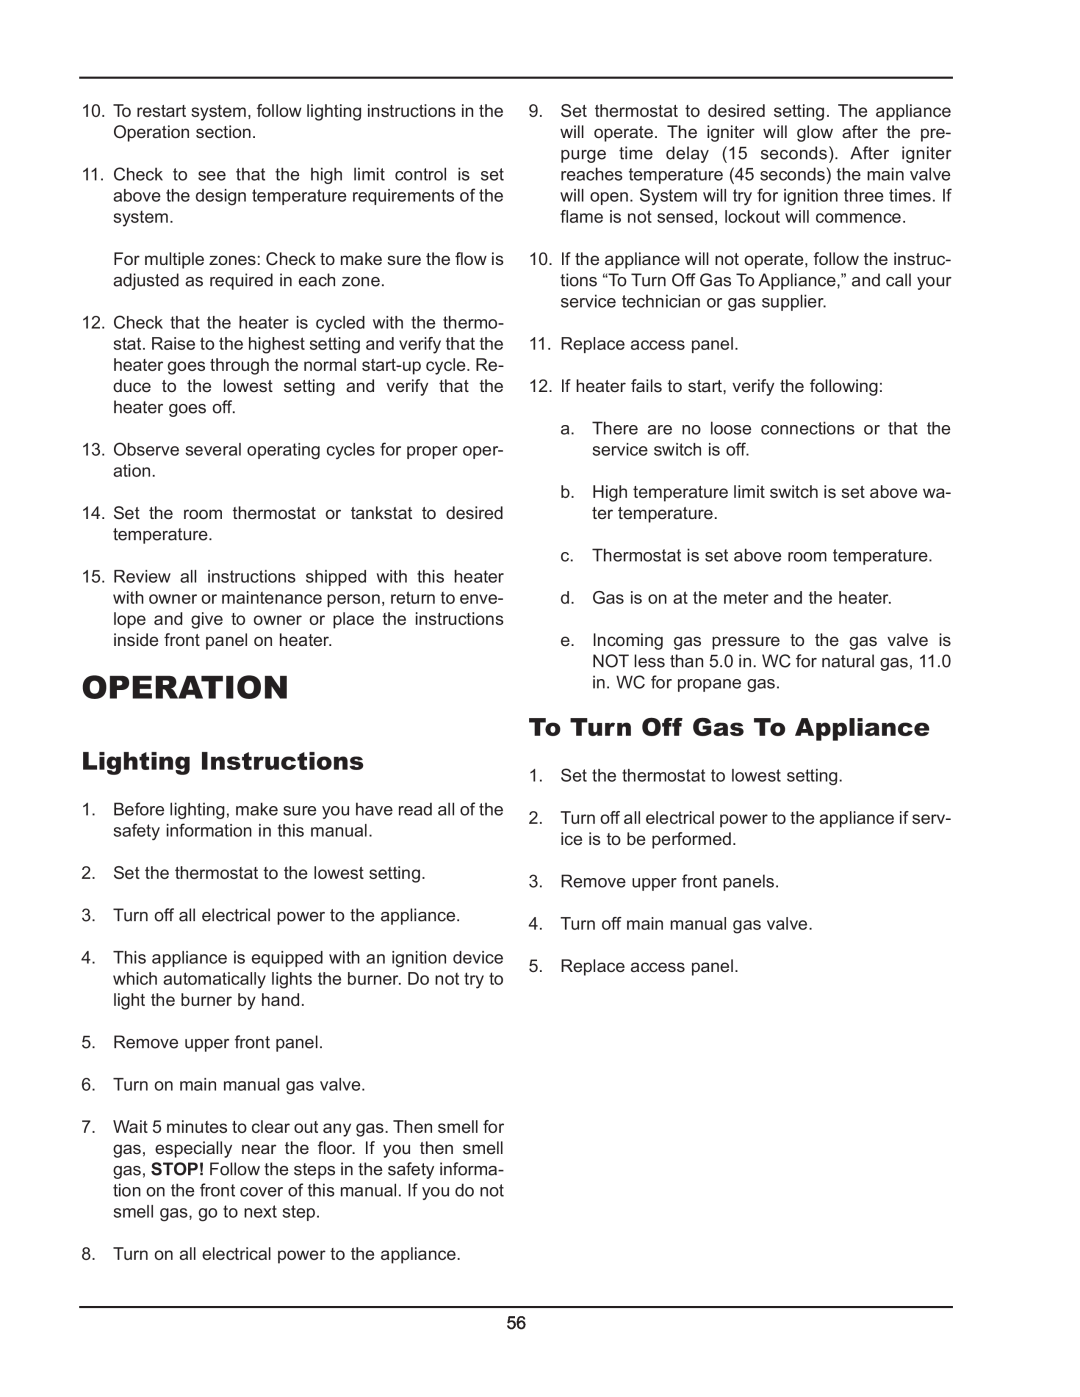 Raypak 992B-1262B manual Operation, Lighting Instructions, To Turn Off Gas To Appliance 